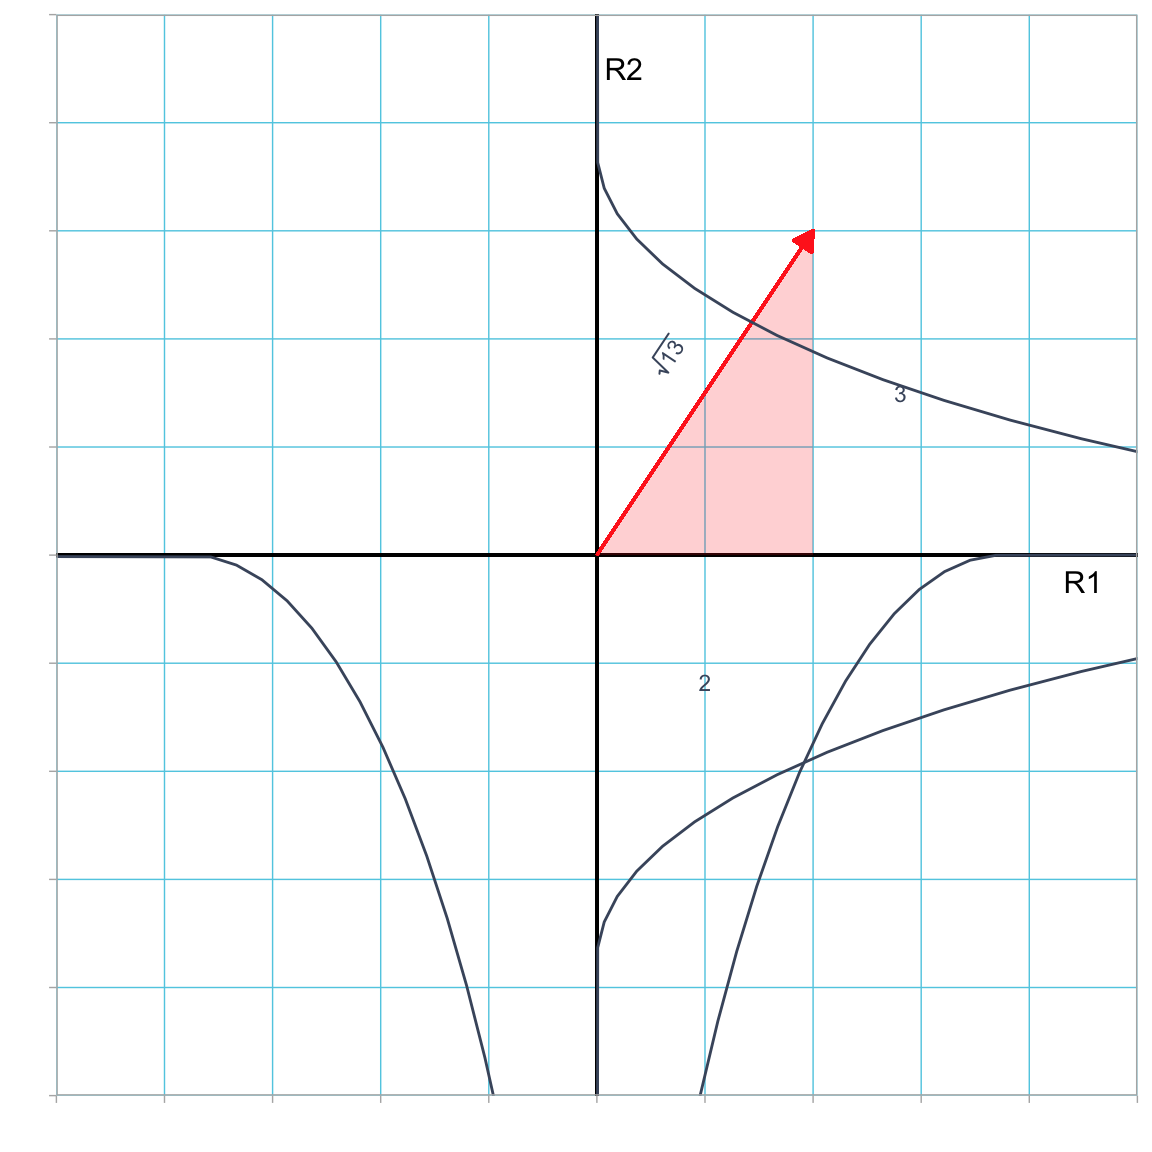 Plot showing vector **a** (in red) in the R1--R2 dimensional space. This vector is the hypotenuse of a right triangle with legs of length 2 and 3.